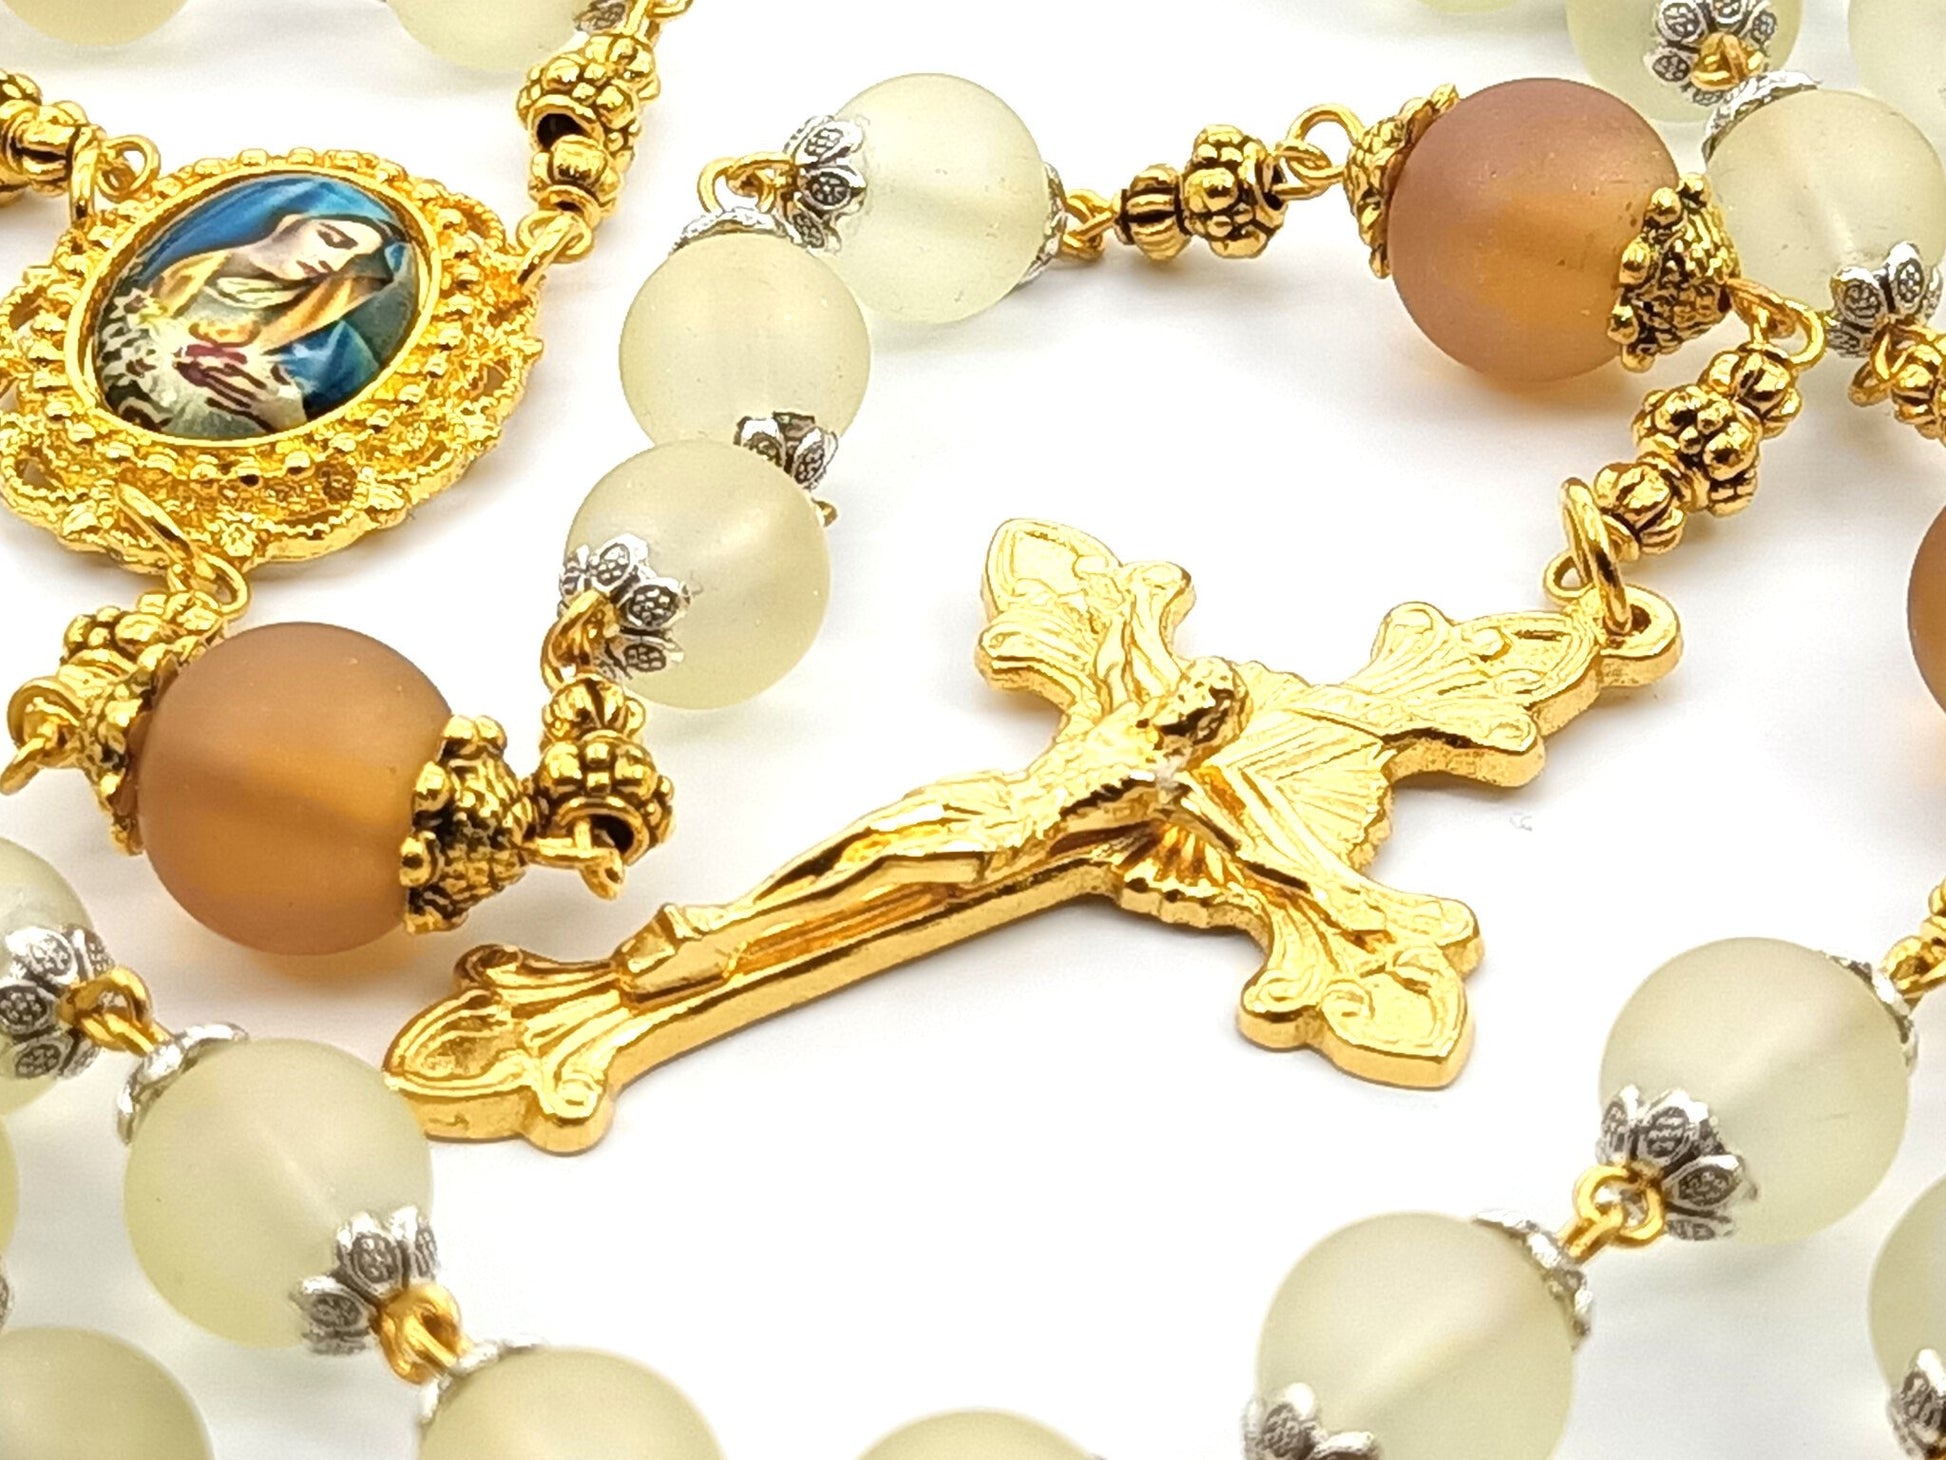 The Immaculate Heart of Mary unique rosary beads with pale frosted glass beads, gold crucifix, picture centre medal and bead caps.